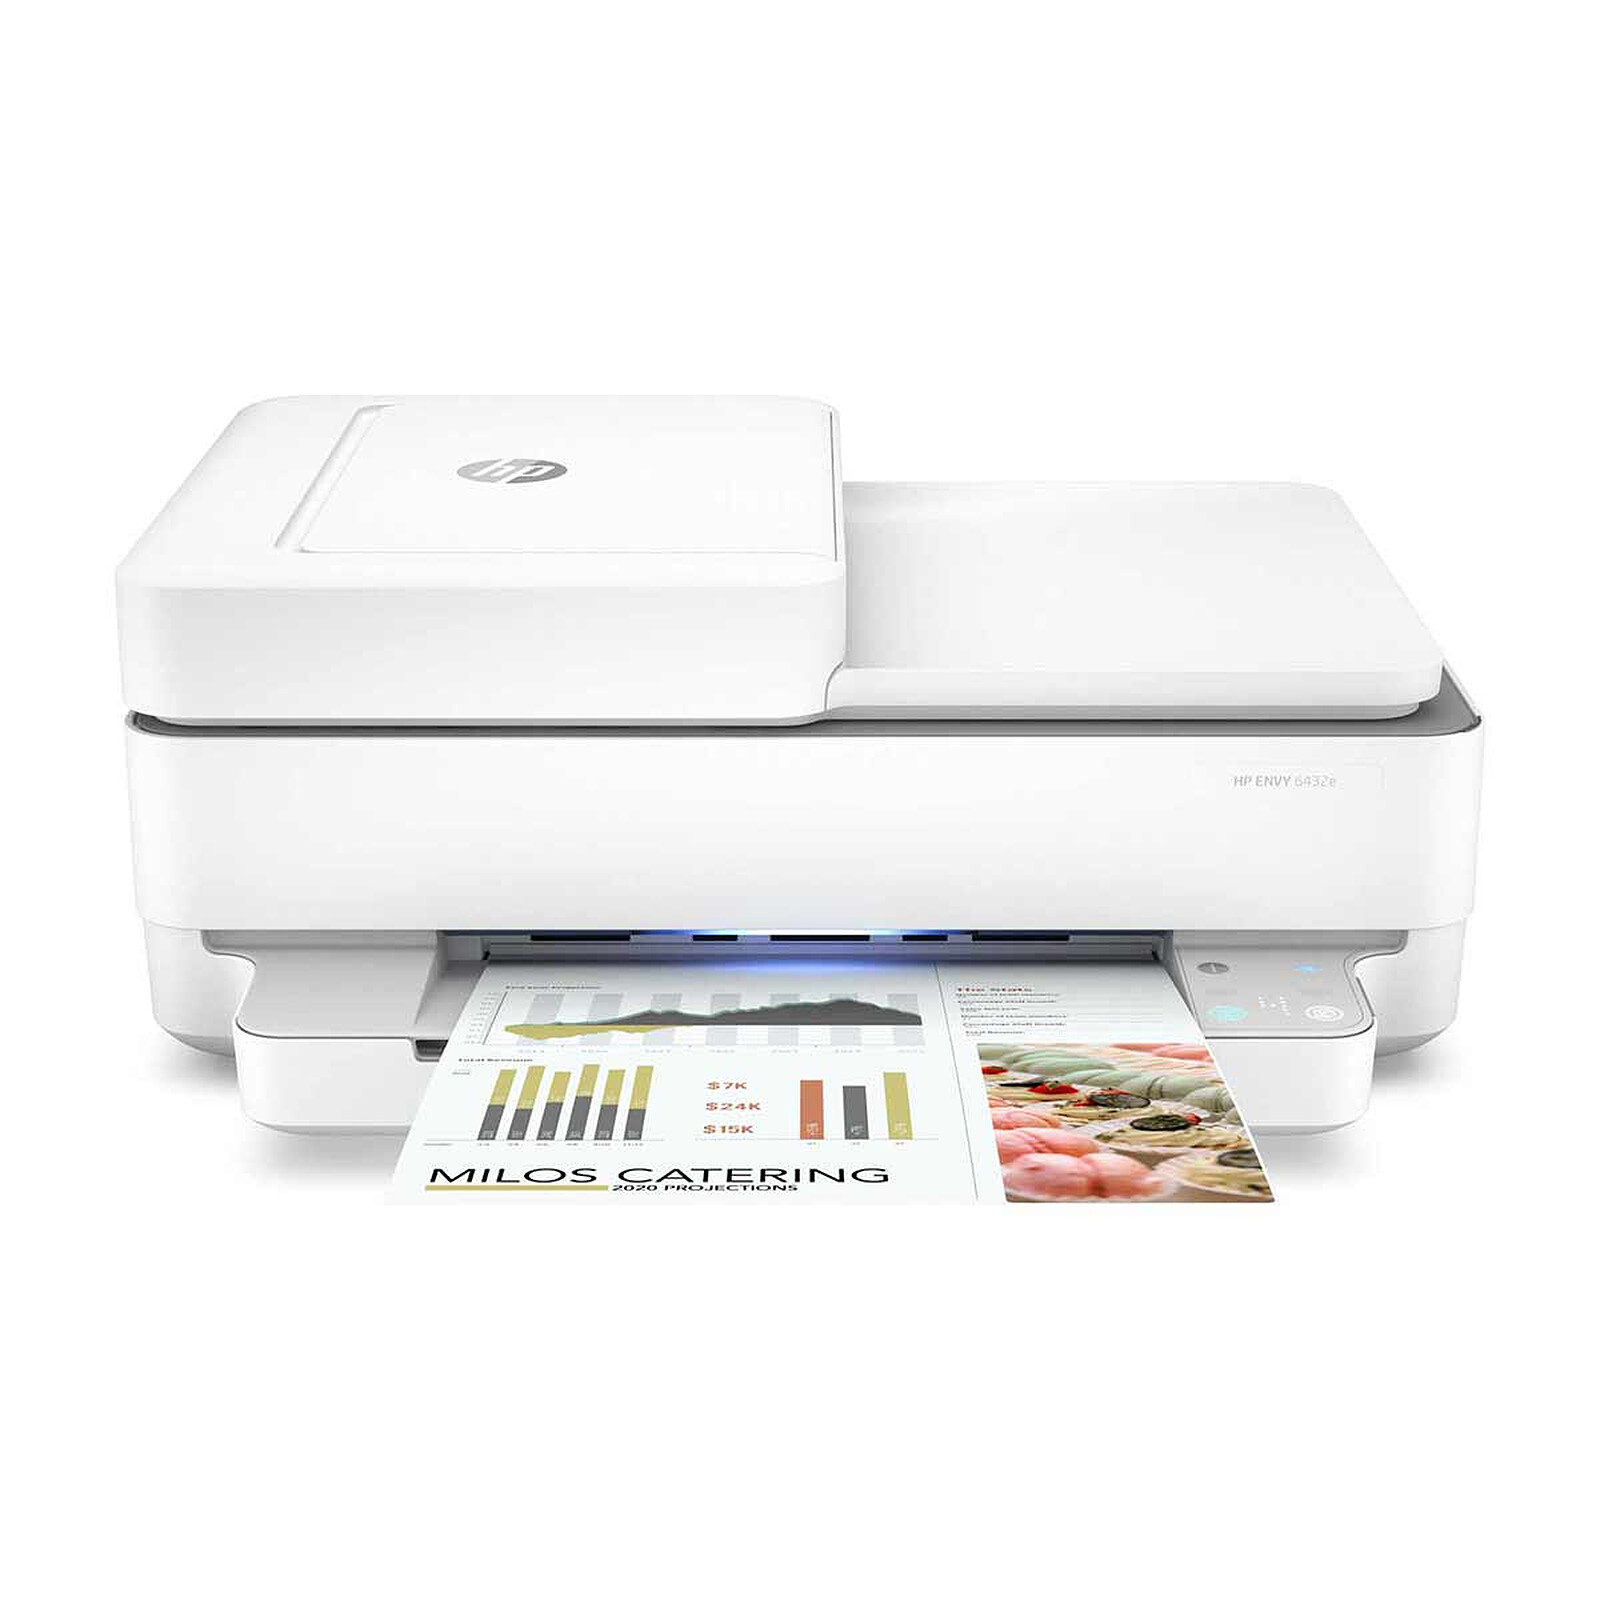 HP Envy 6432e - All-in-one printer - LDLC 3-year warranty